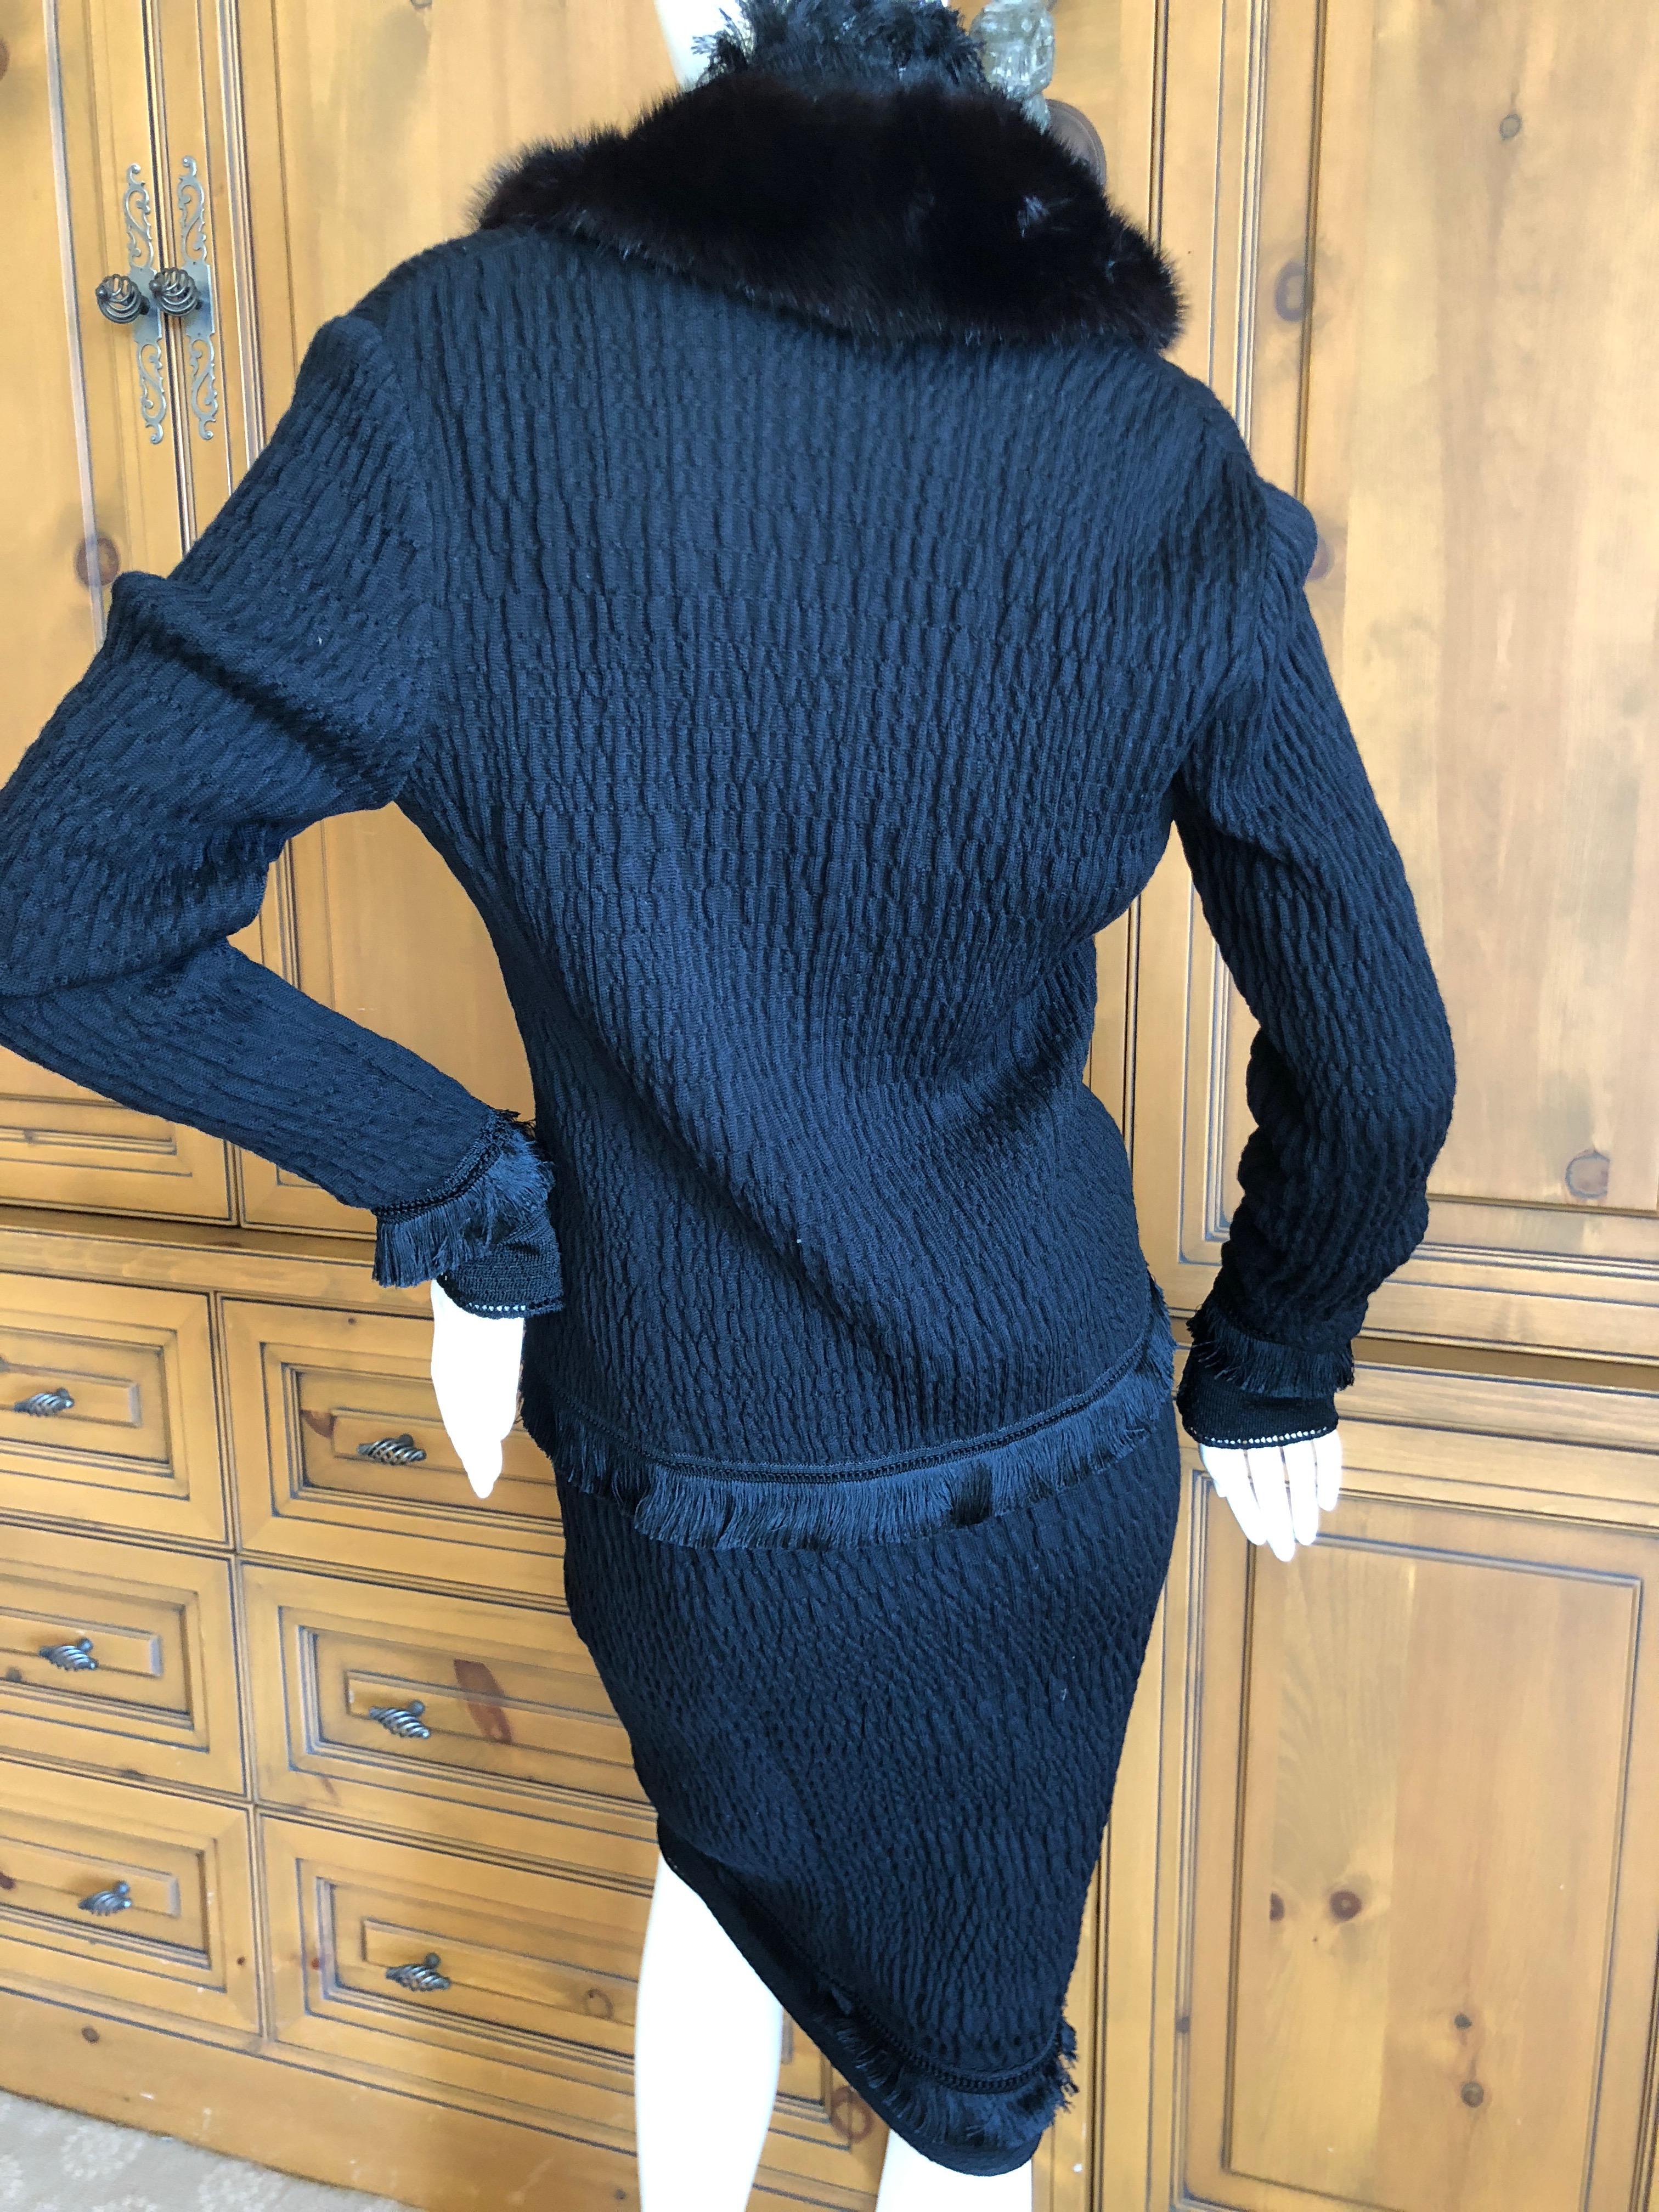 John Galliano Black Fringed Dress with Matching Wide Mink Collar Sweater, 1990s  For Sale 4